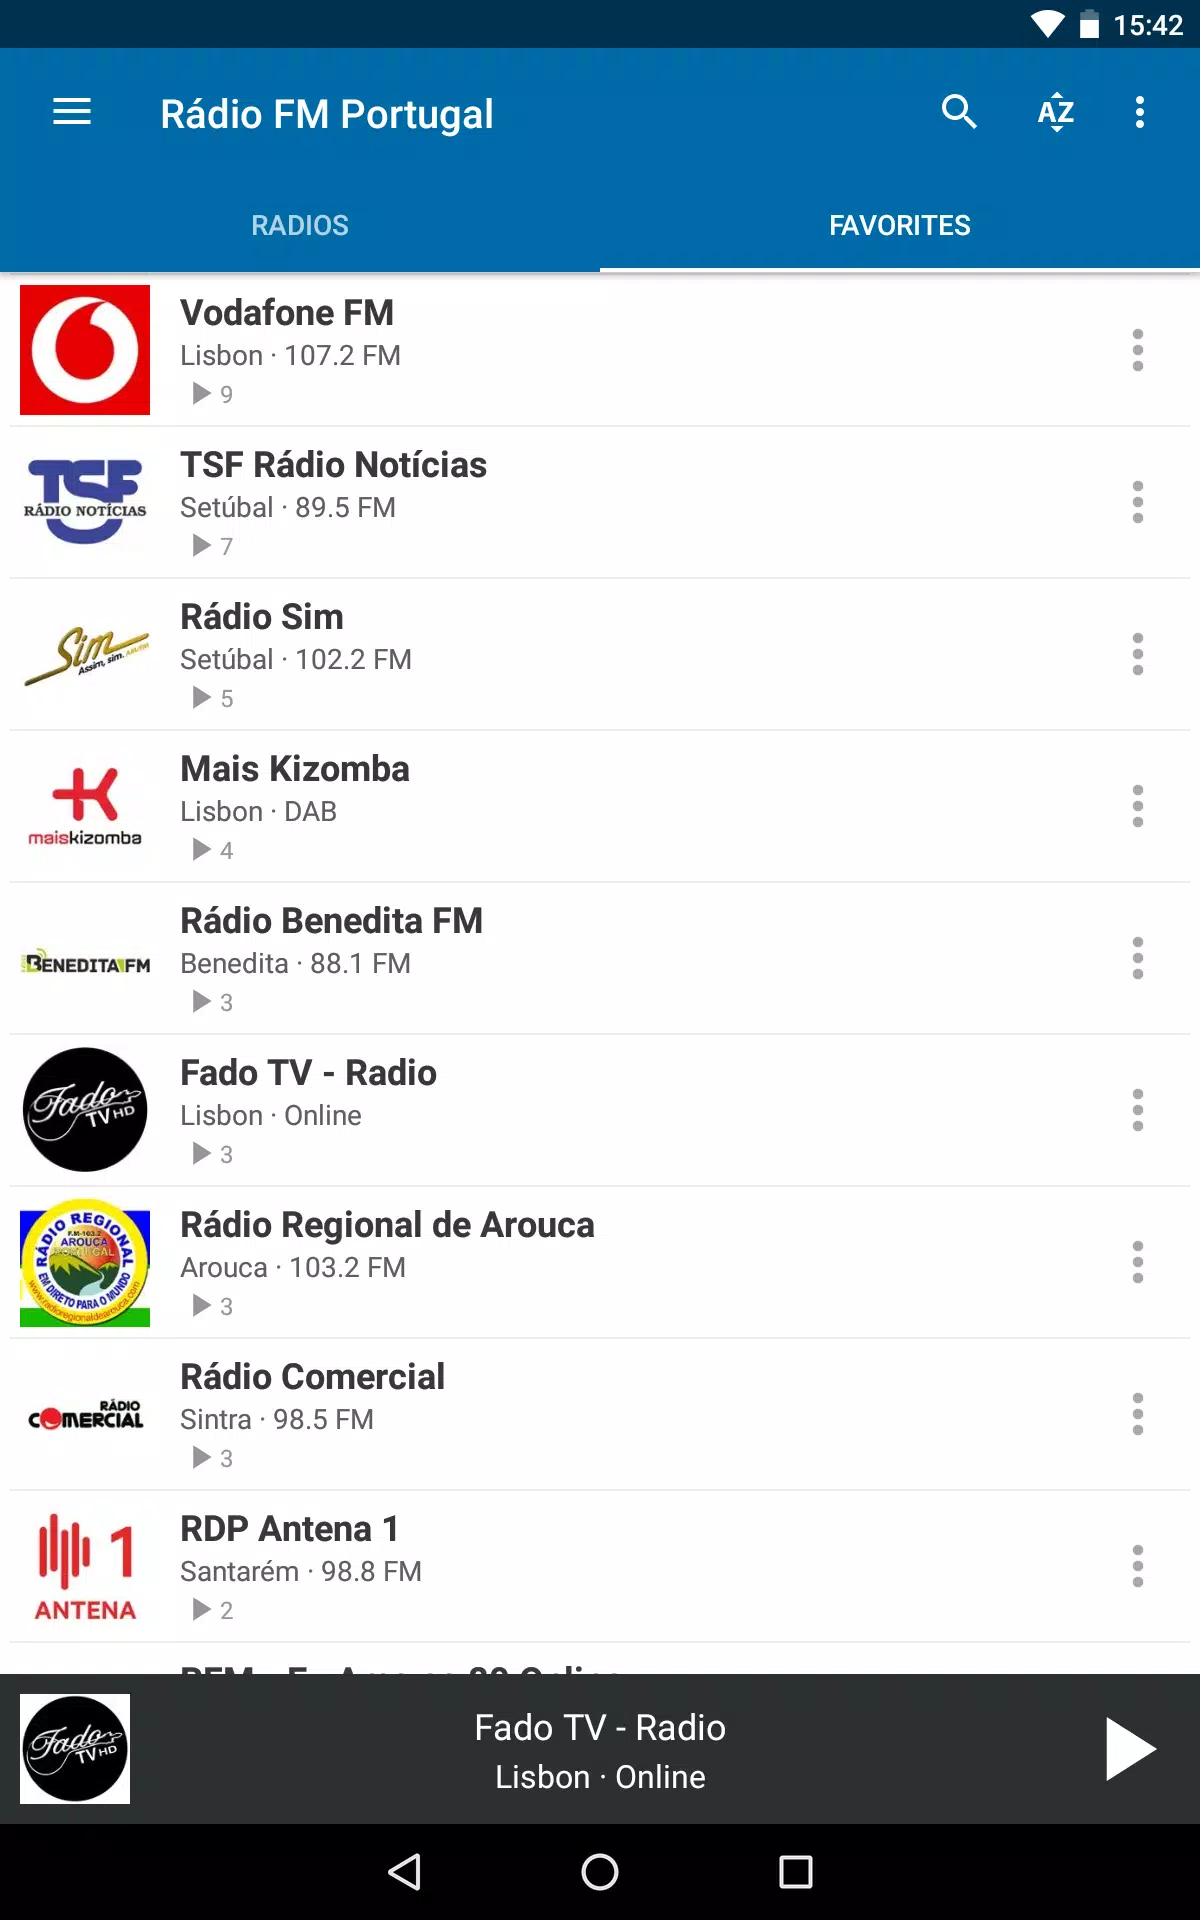 Radio FM Portugal for Android - APK Download